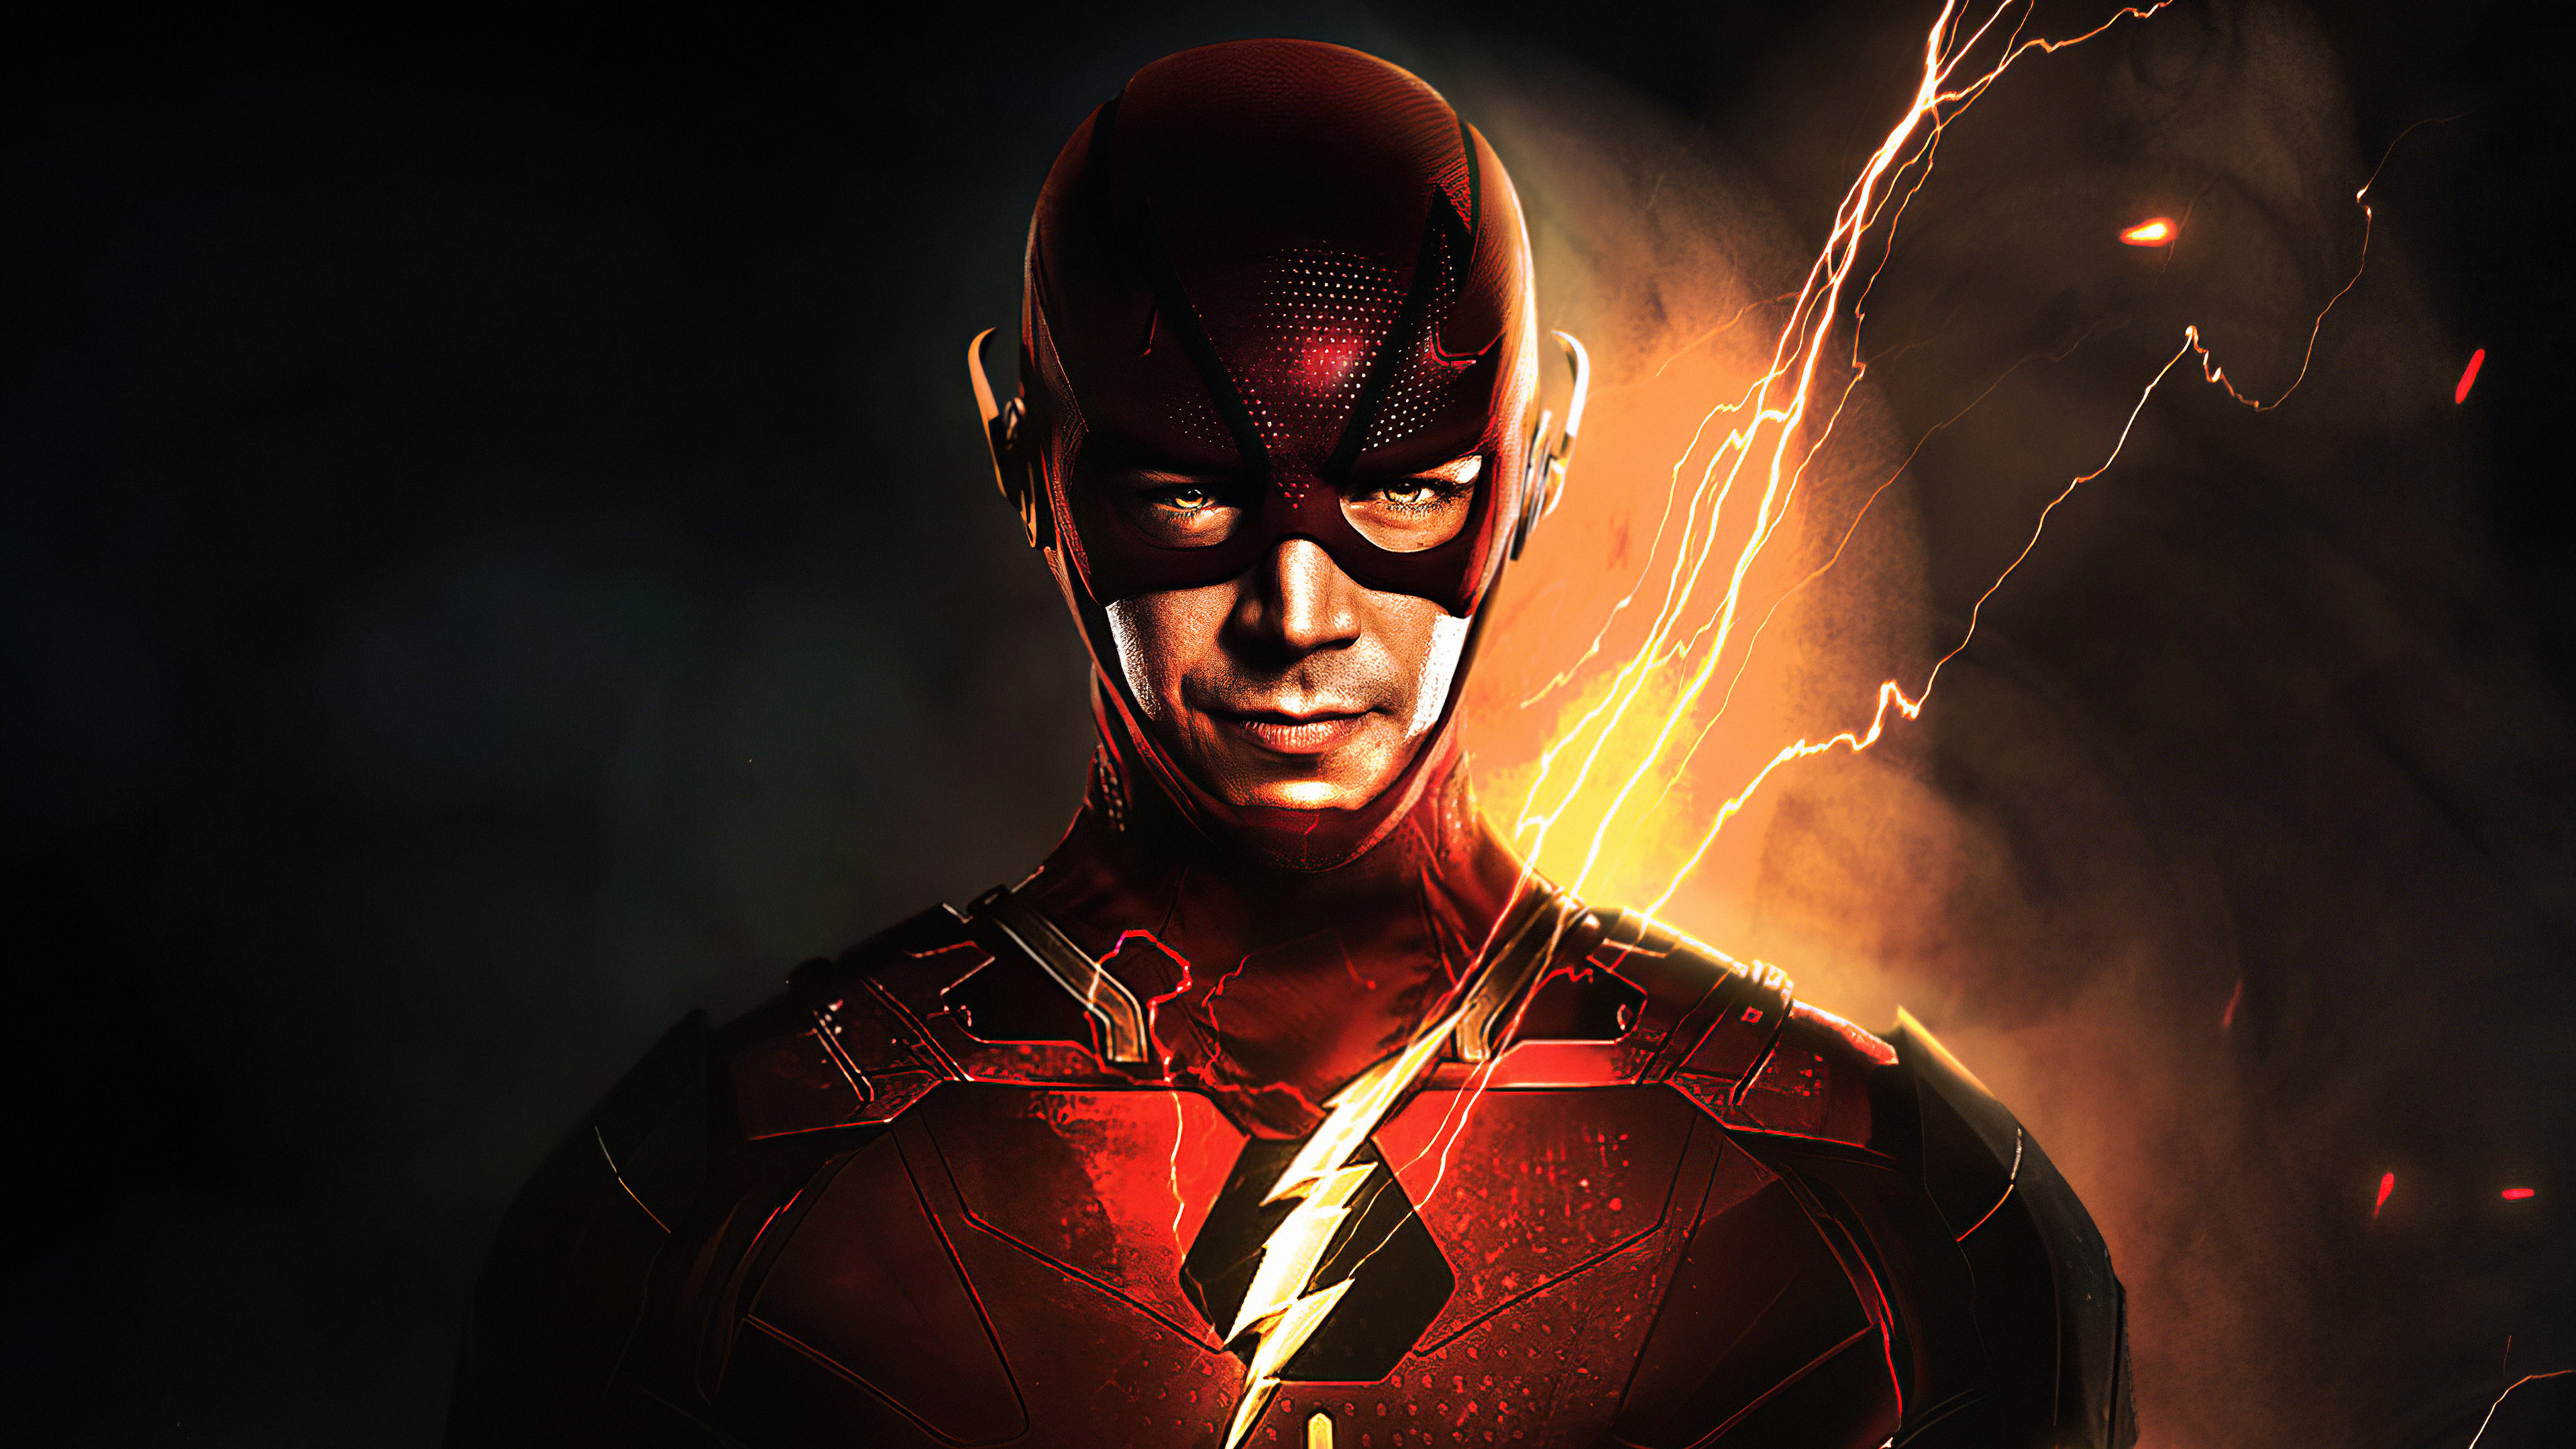 Flash (TV Series): A superhero appearing in American comic books published by DC Comics. 3840x2160 4K Wallpaper.